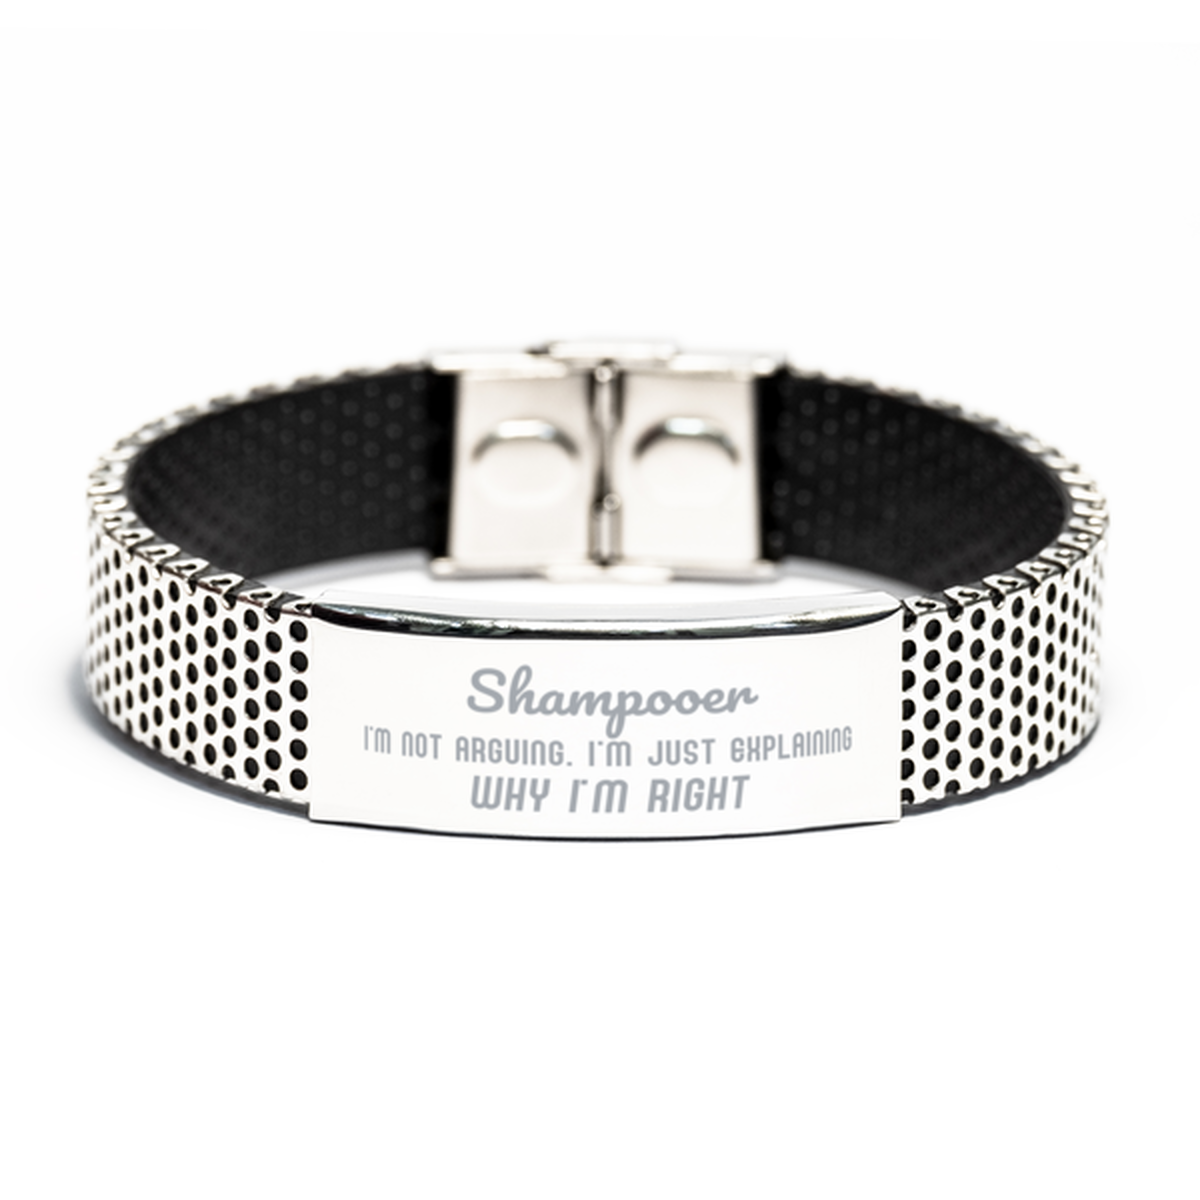 Shampooer I'm not Arguing. I'm Just Explaining Why I'm RIGHT Stainless Steel Bracelet, Funny Saying Quote Shampooer Gifts For Shampooer Graduation Birthday Christmas Gifts for Men Women Coworker